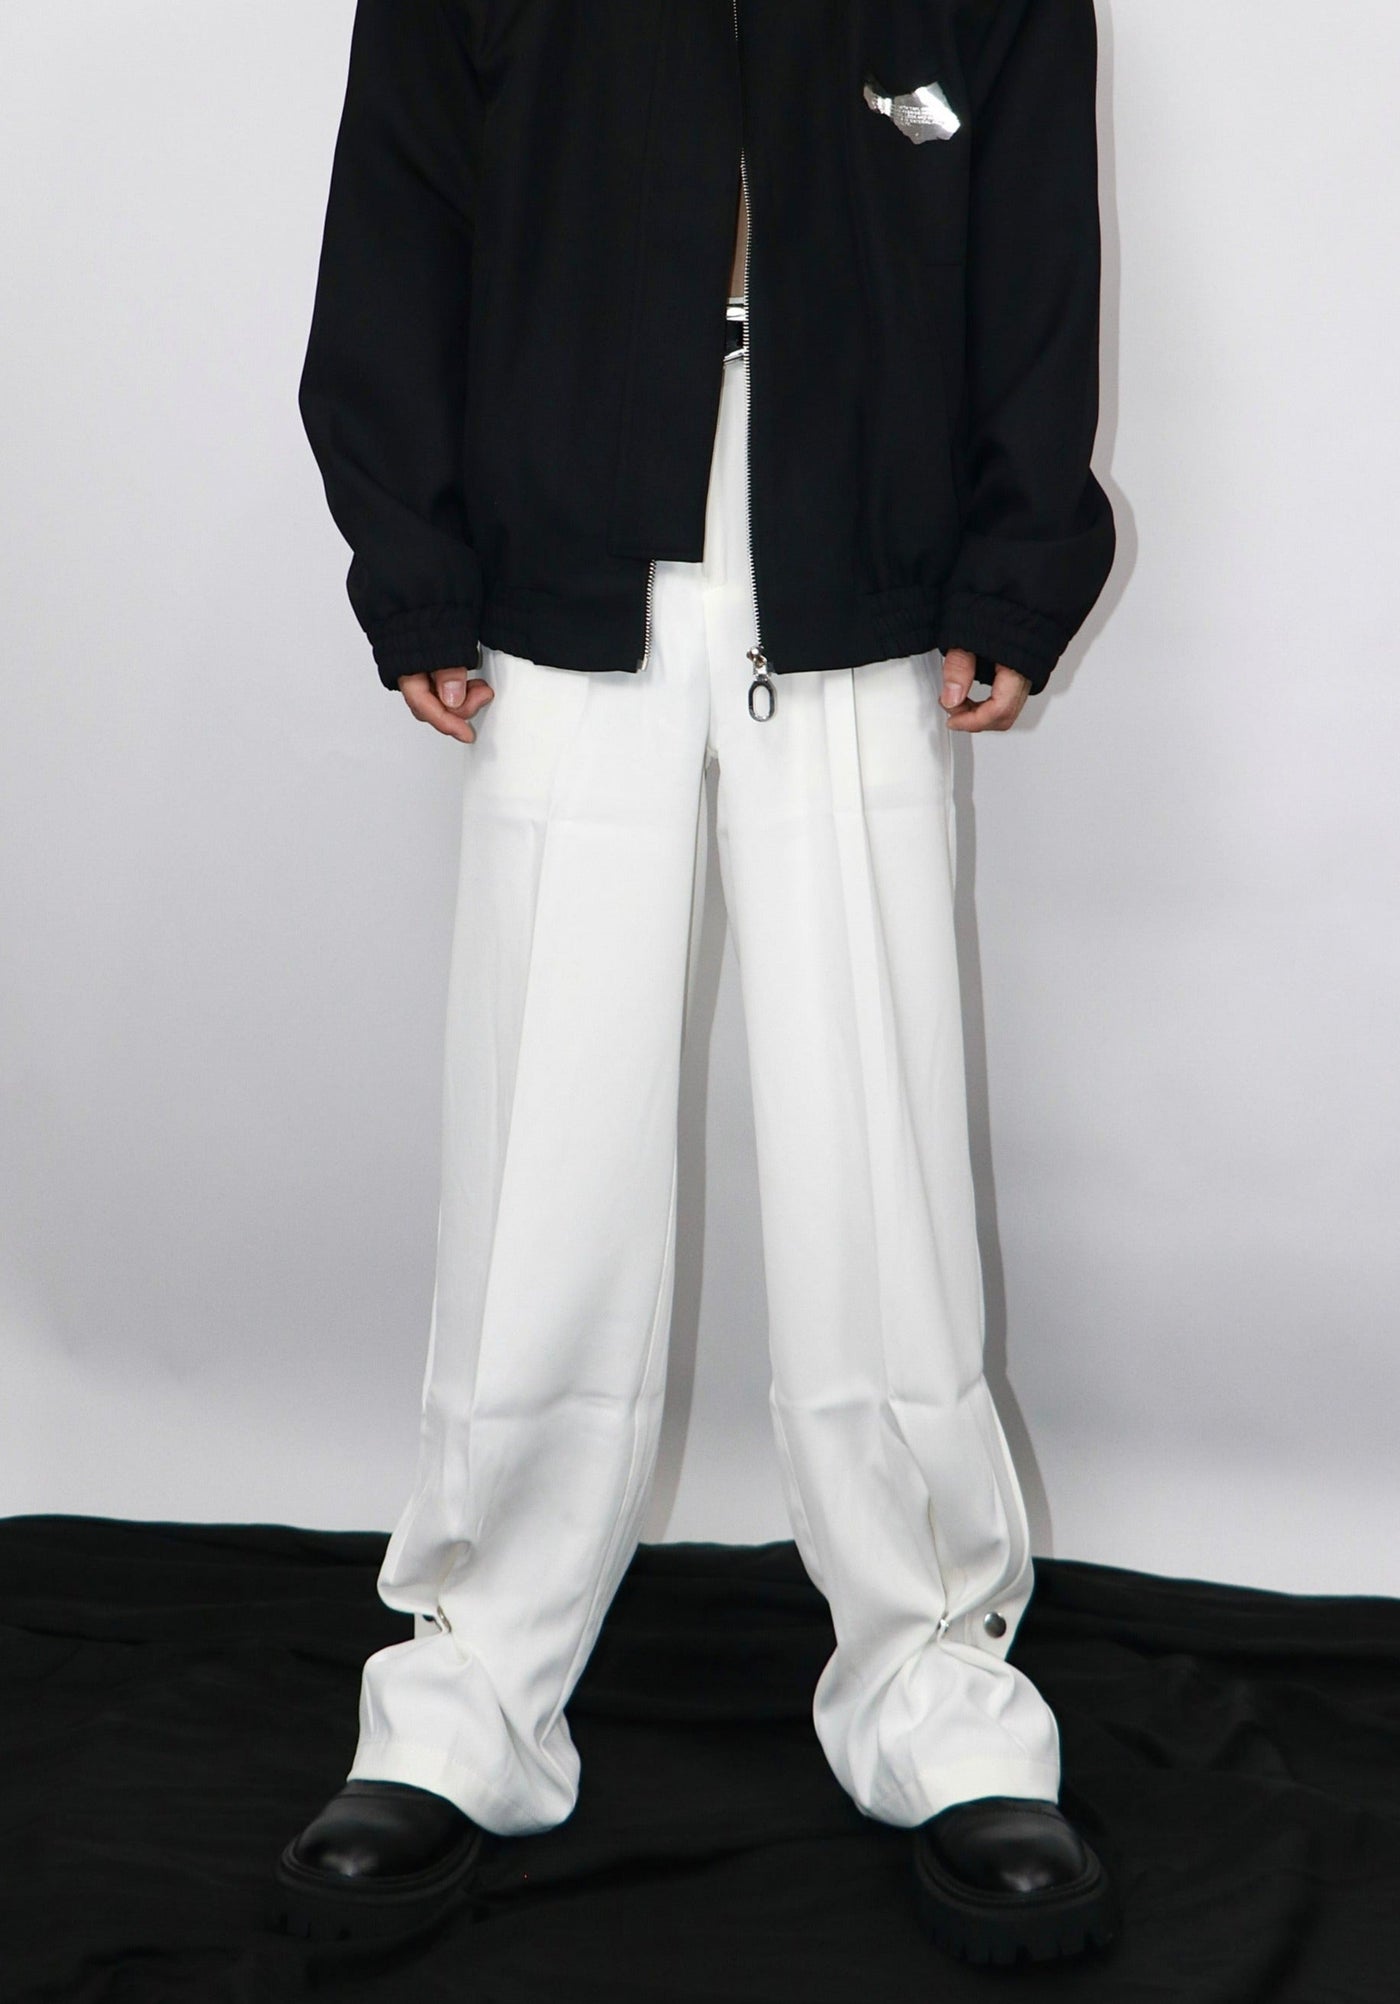 Buttoned Bootcut Trousers Korean Street Fashion Pants By Argue Culture Shop Online at OH Vault